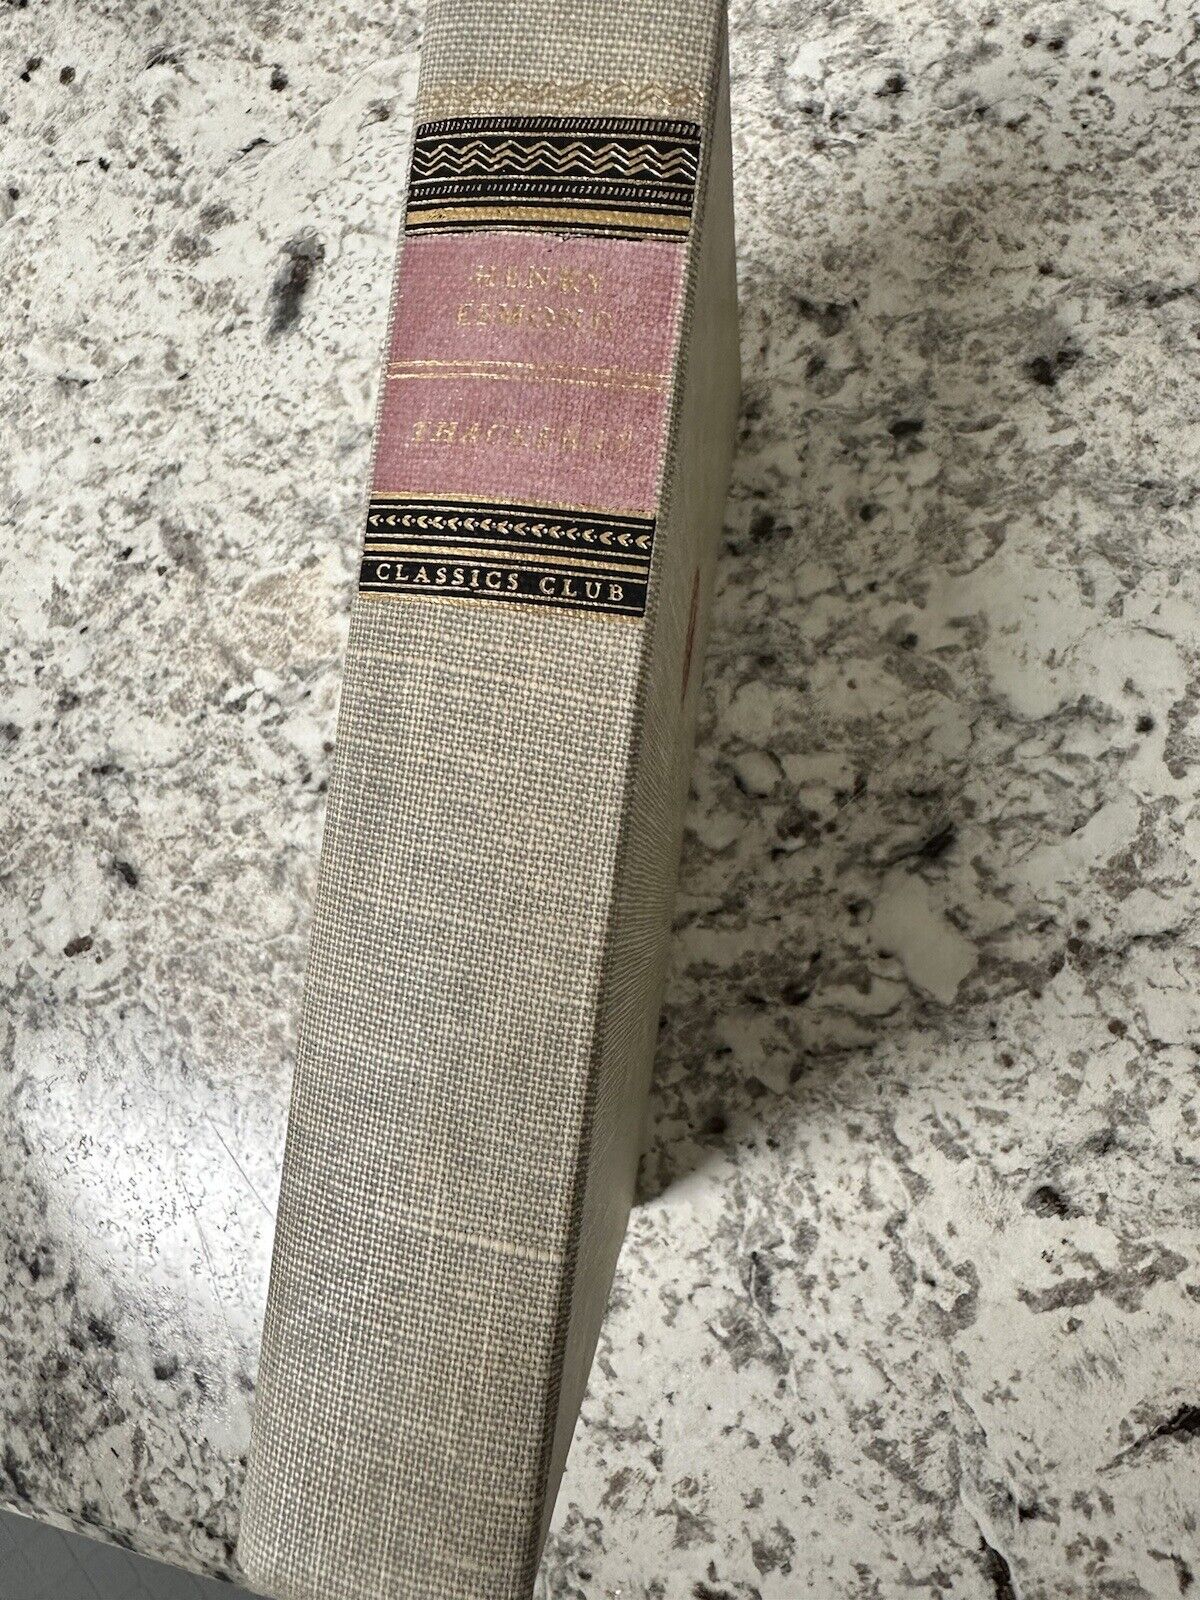 The History of Henry Esmond by William Makepeace Thackeray 1942 Classics Club